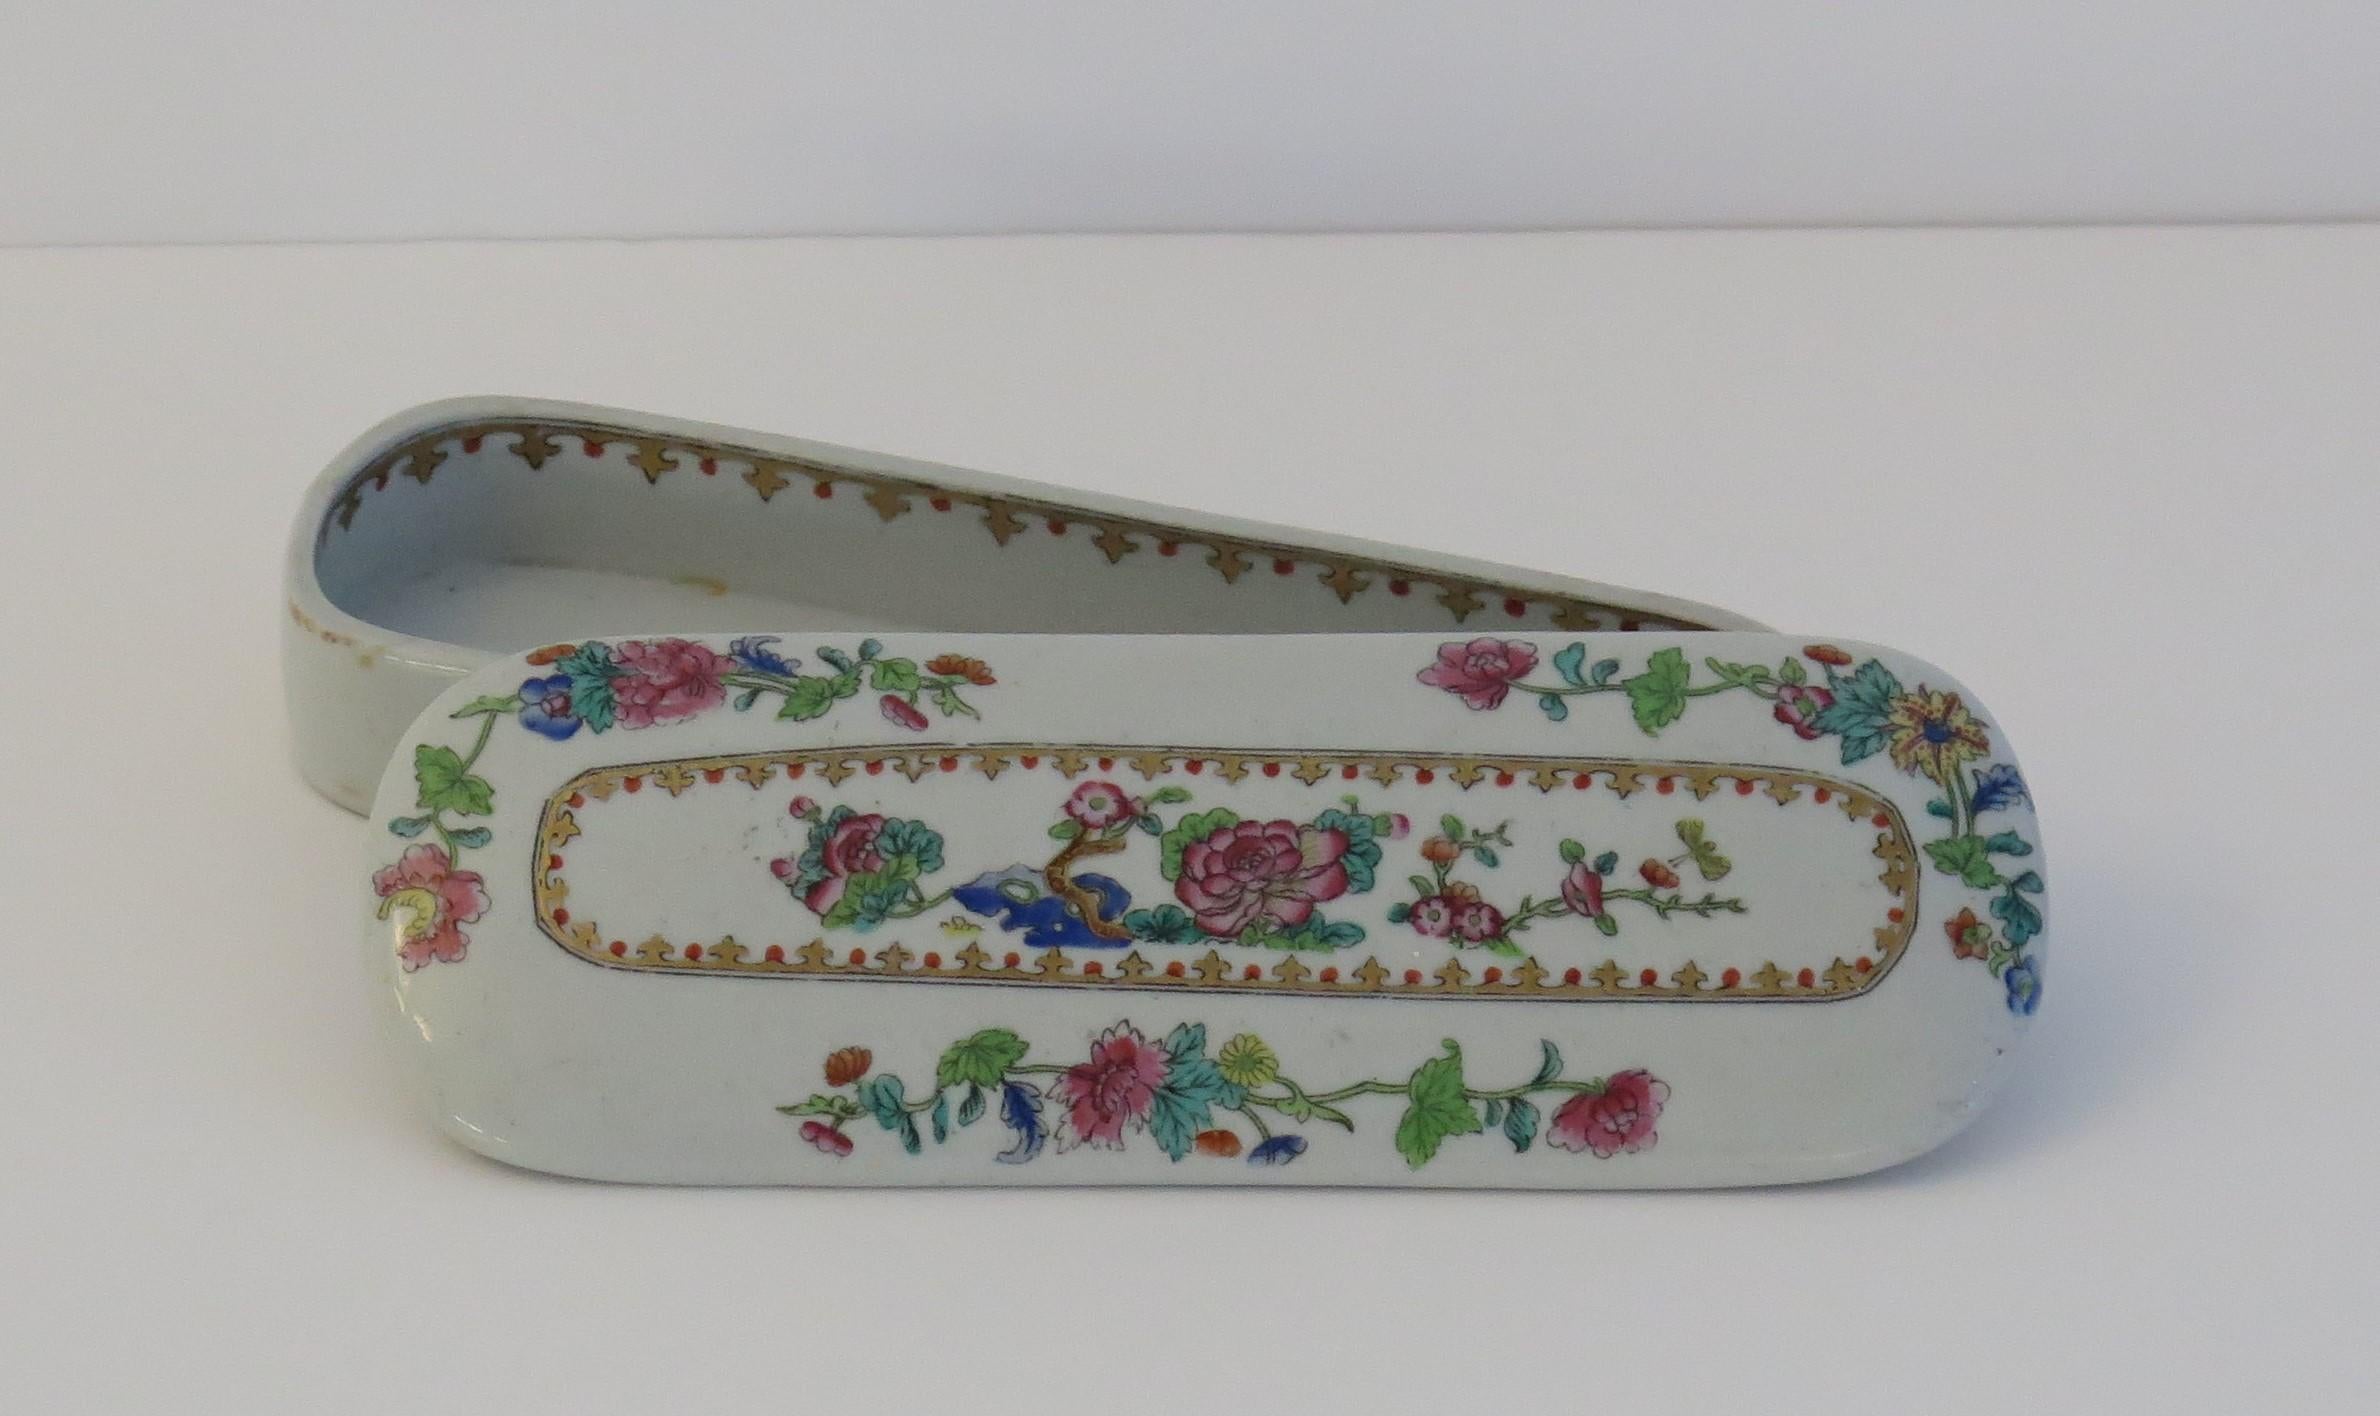 This is a good stone China (Ironstone) Pen Tray or Box with lid, made by the SPODE factory in the early 19th Century, circa 1810.

This piece comprises a base and a lid both made from stone china. The base is potted as an open rectangular box or